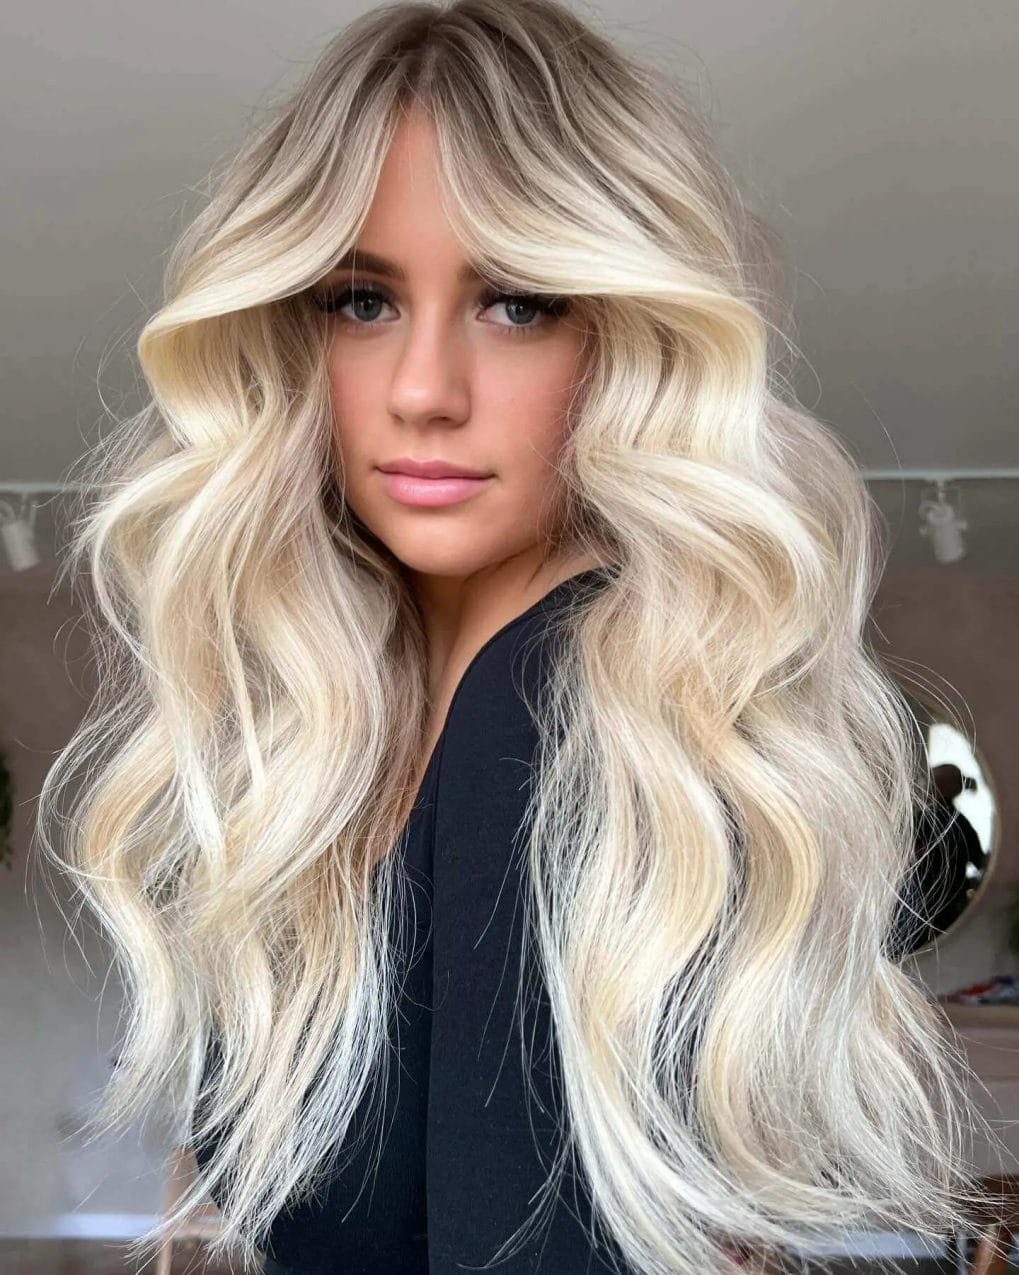 Beachy blonde waves with seamlessly blended curtain bangs